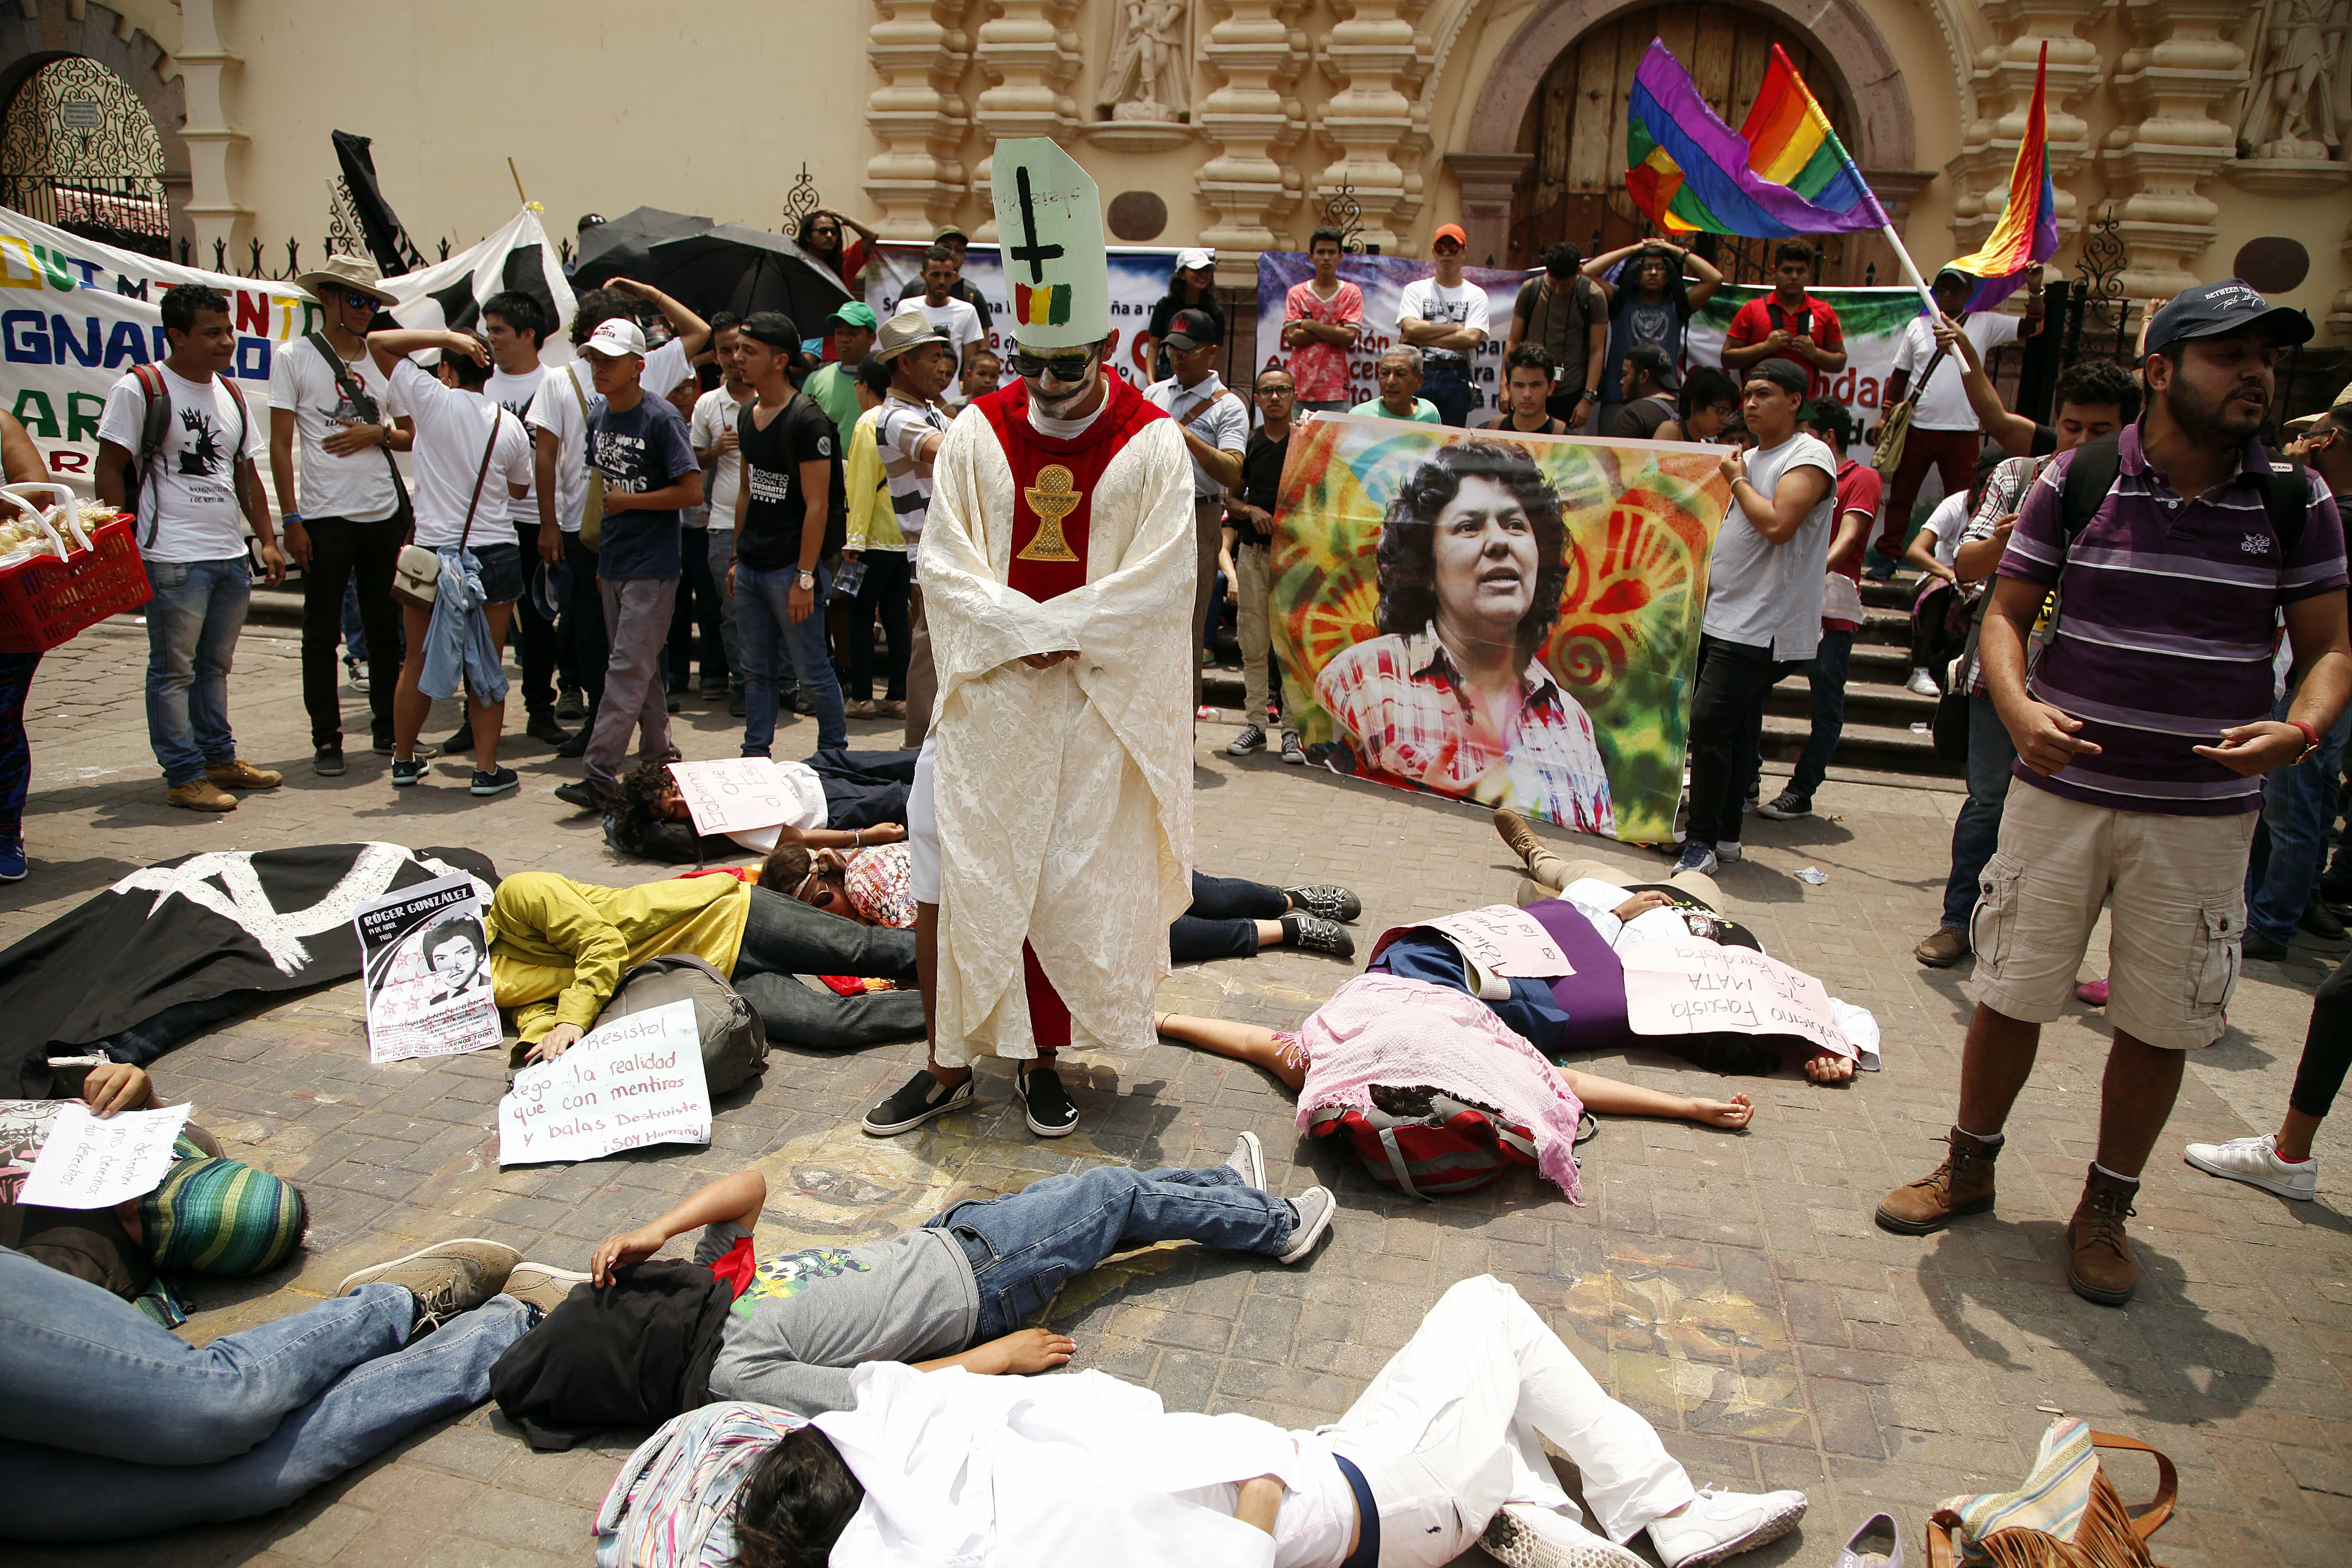 University students protest in front of the Tegucigalpa Cathedral to demand justice for the murder of Berta Cáceres, 1 May 2017, AP Photo/Fernando Antonio